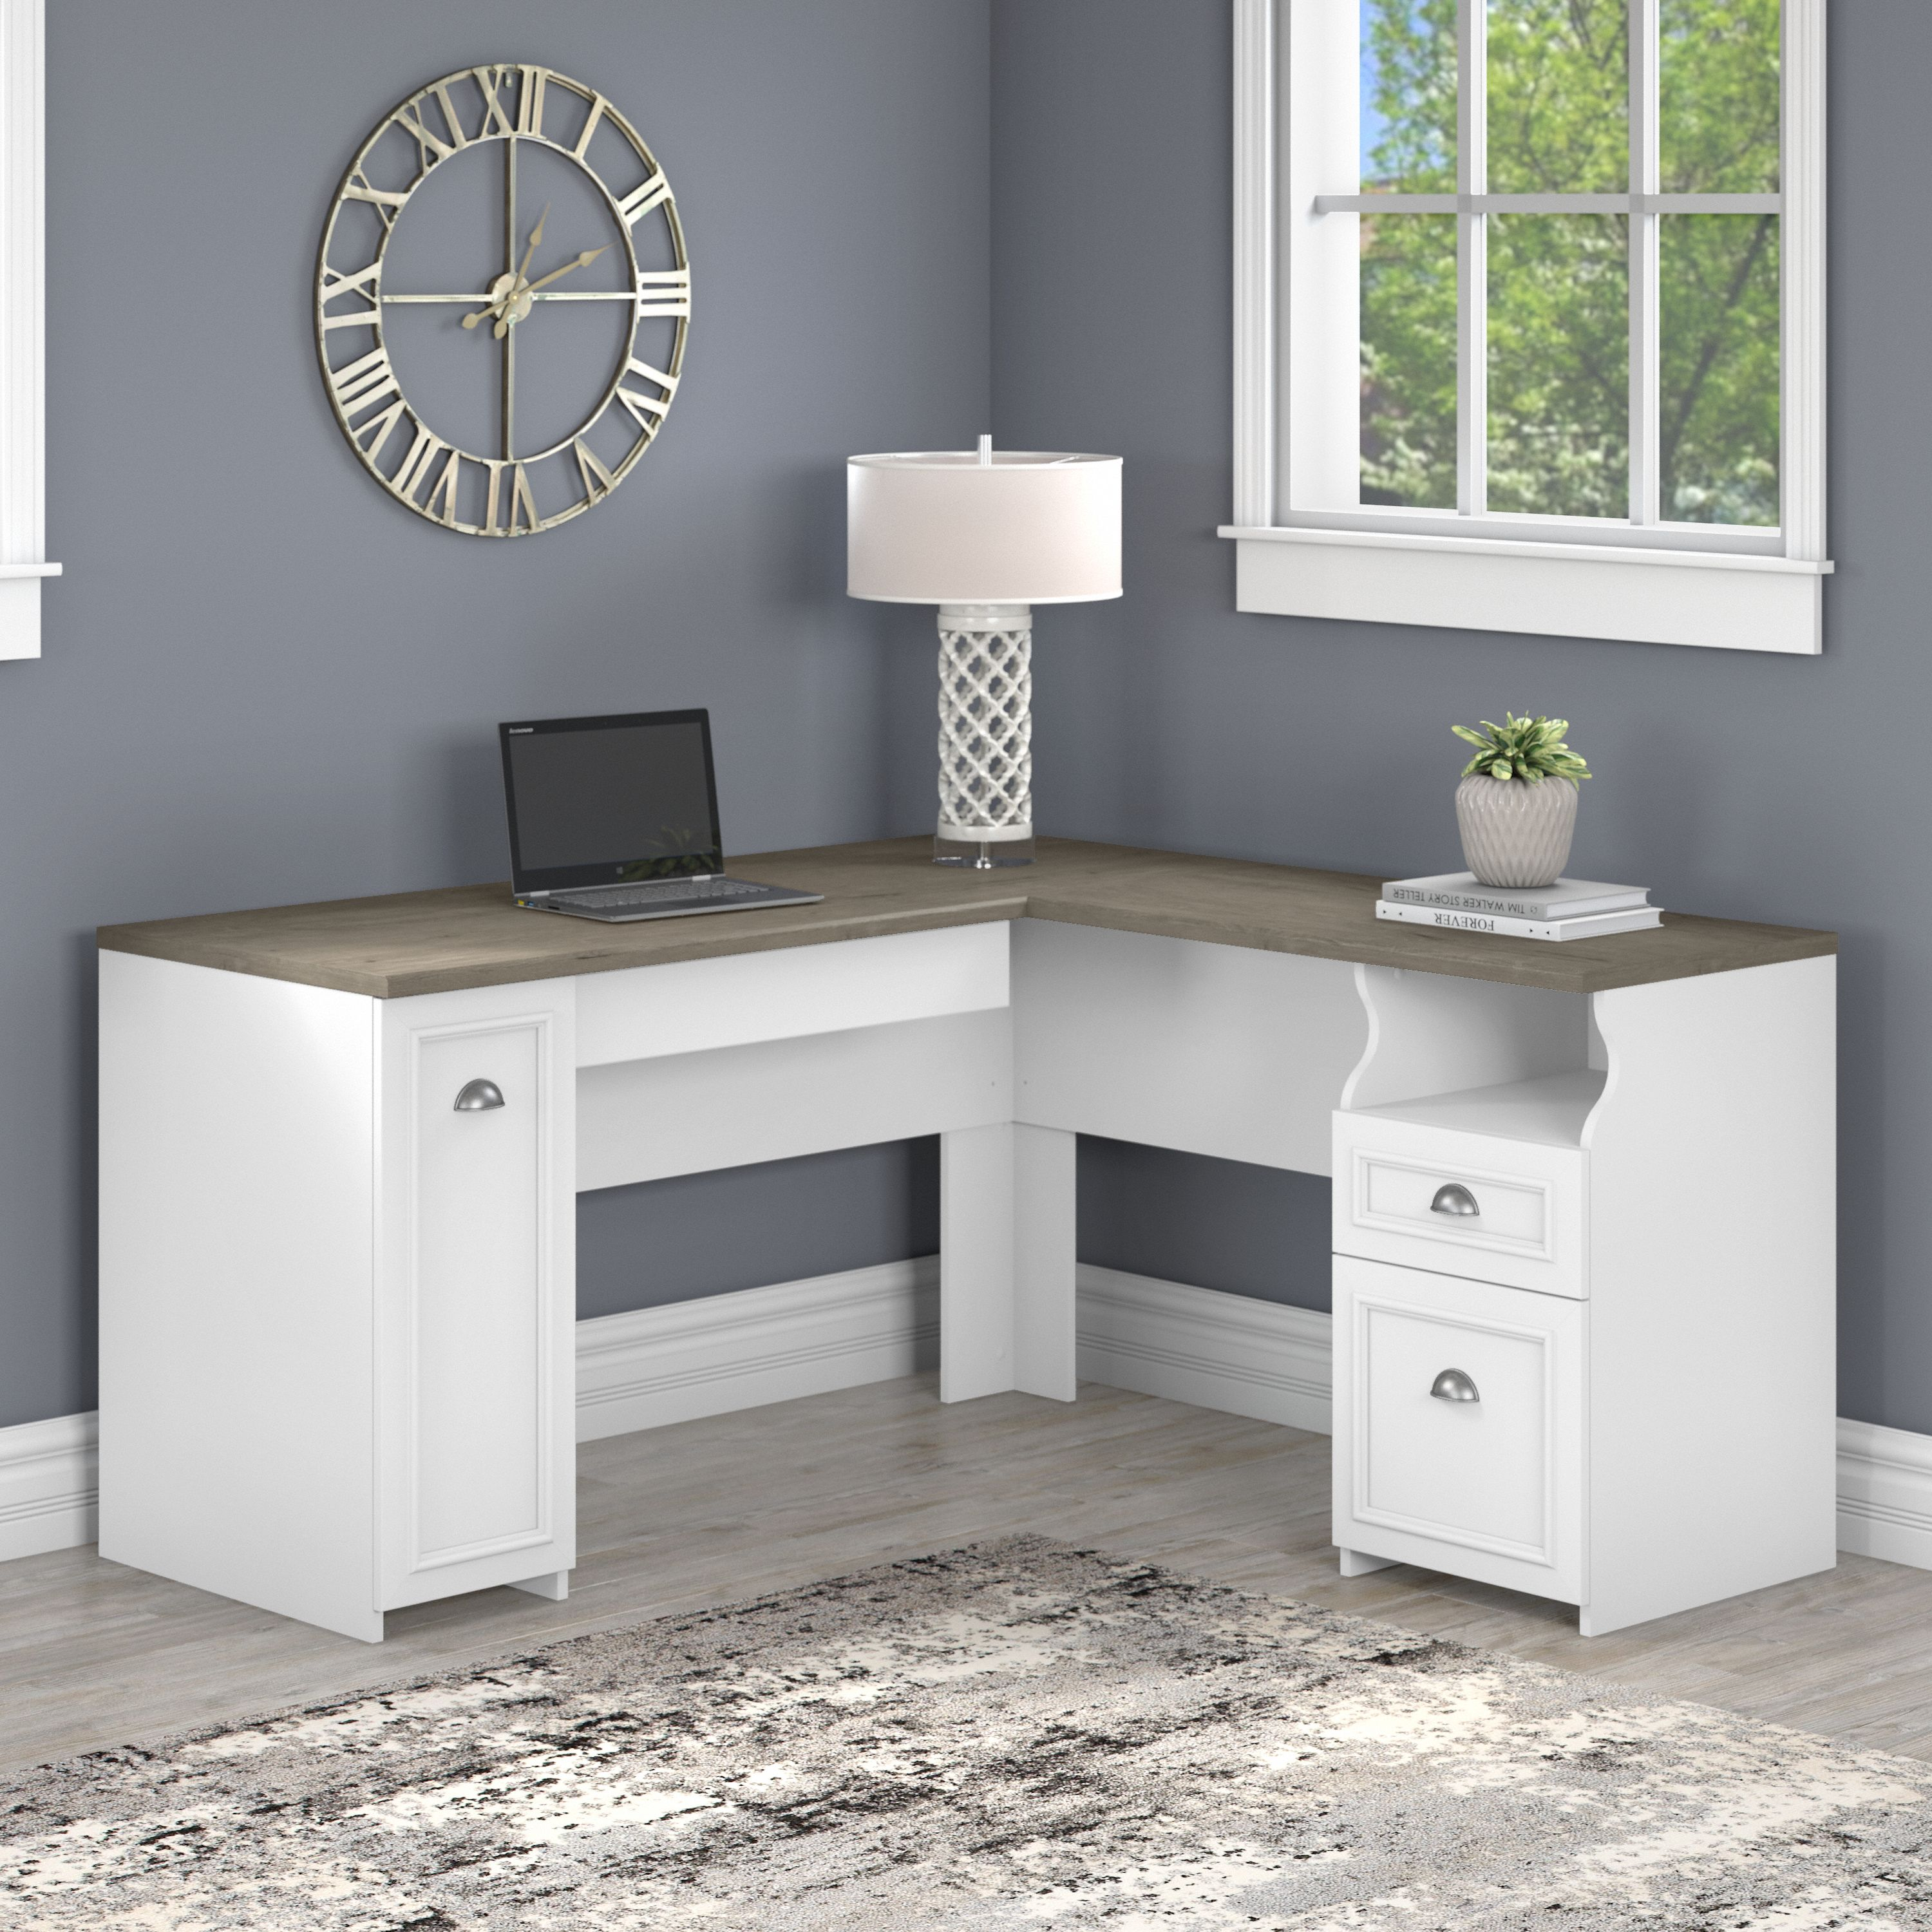 Shop Bush Furniture Fairview 60W L Shaped Desk with Drawers and Storage Cabinet 01 WC53630-03K #color_shiplap gray/pure white